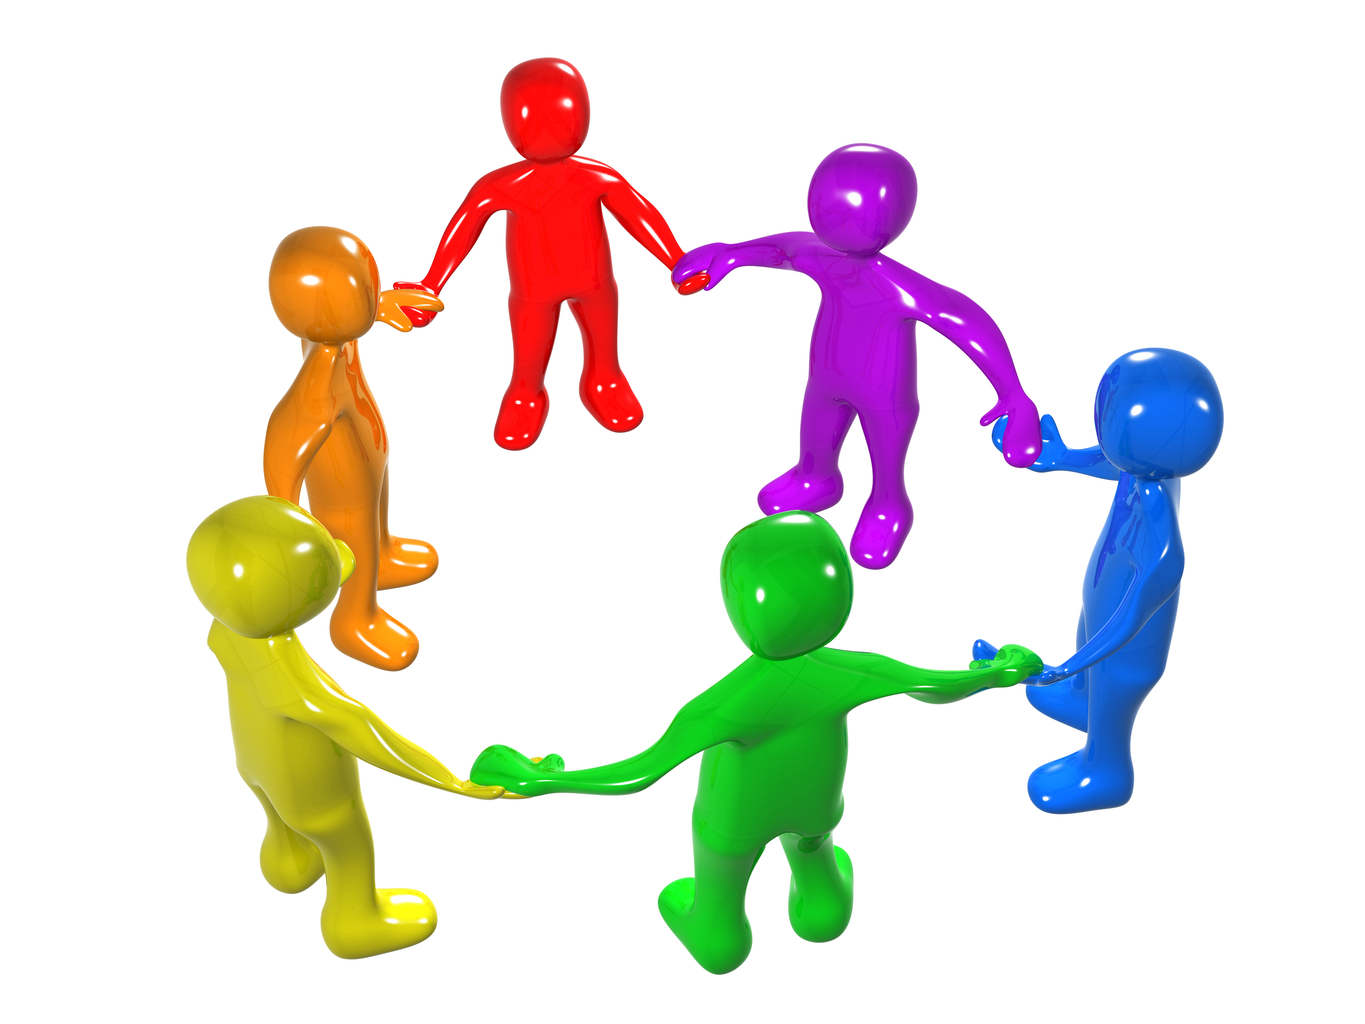 Clipart of people working together - ClipartFox